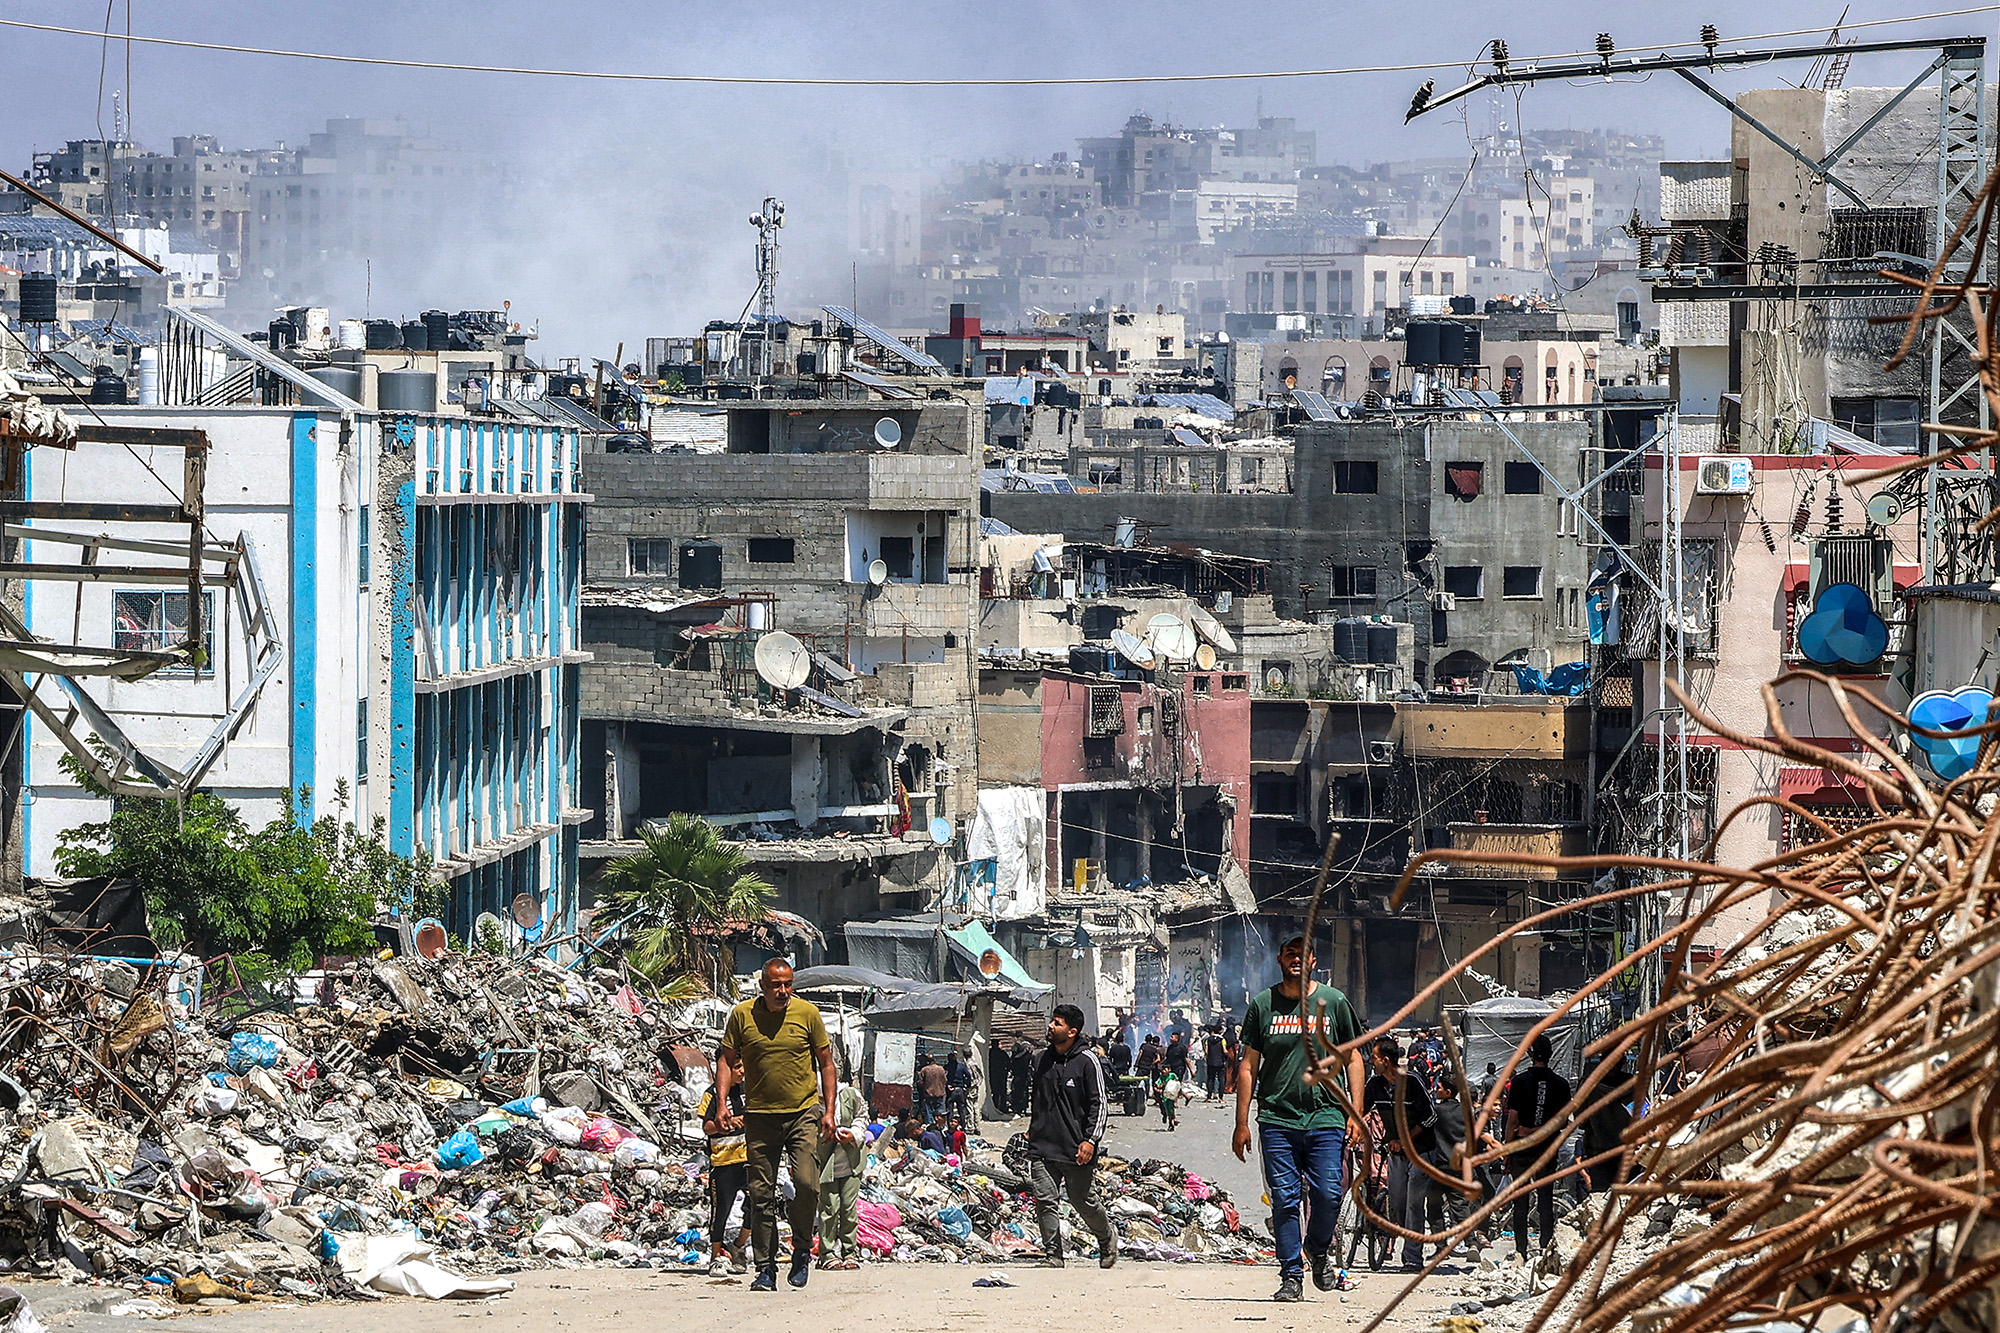 People walk past a mound of trash and destroyed buildings in Jabalya, Gaza, on May 14.